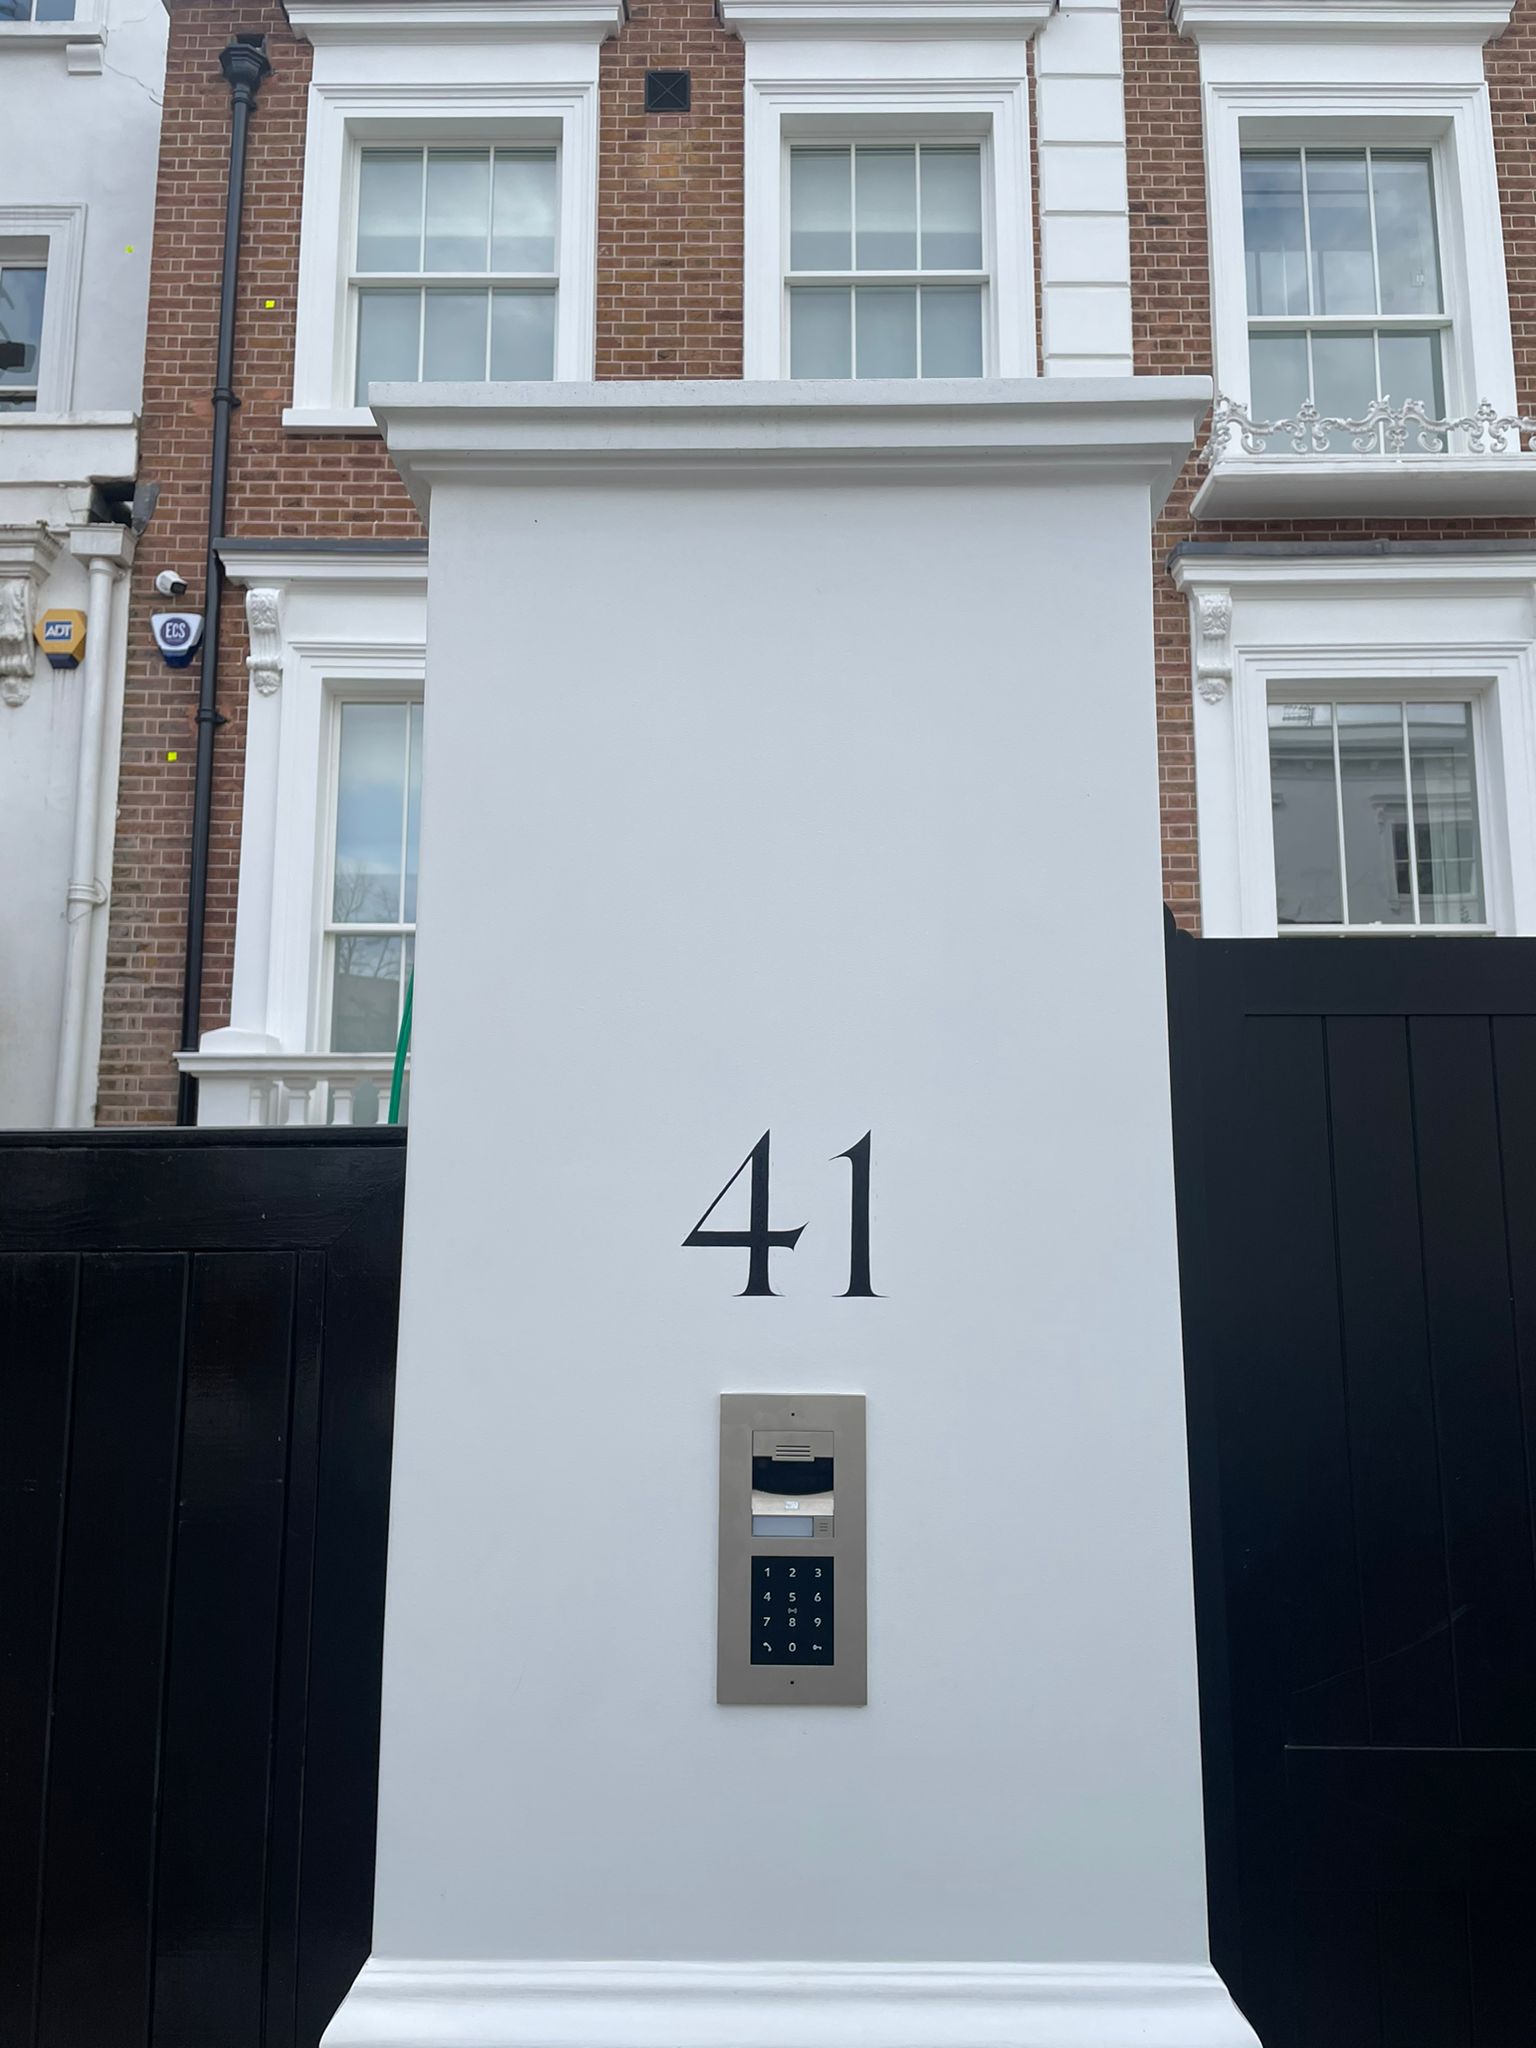 House numbers sign writers ngs LONDON